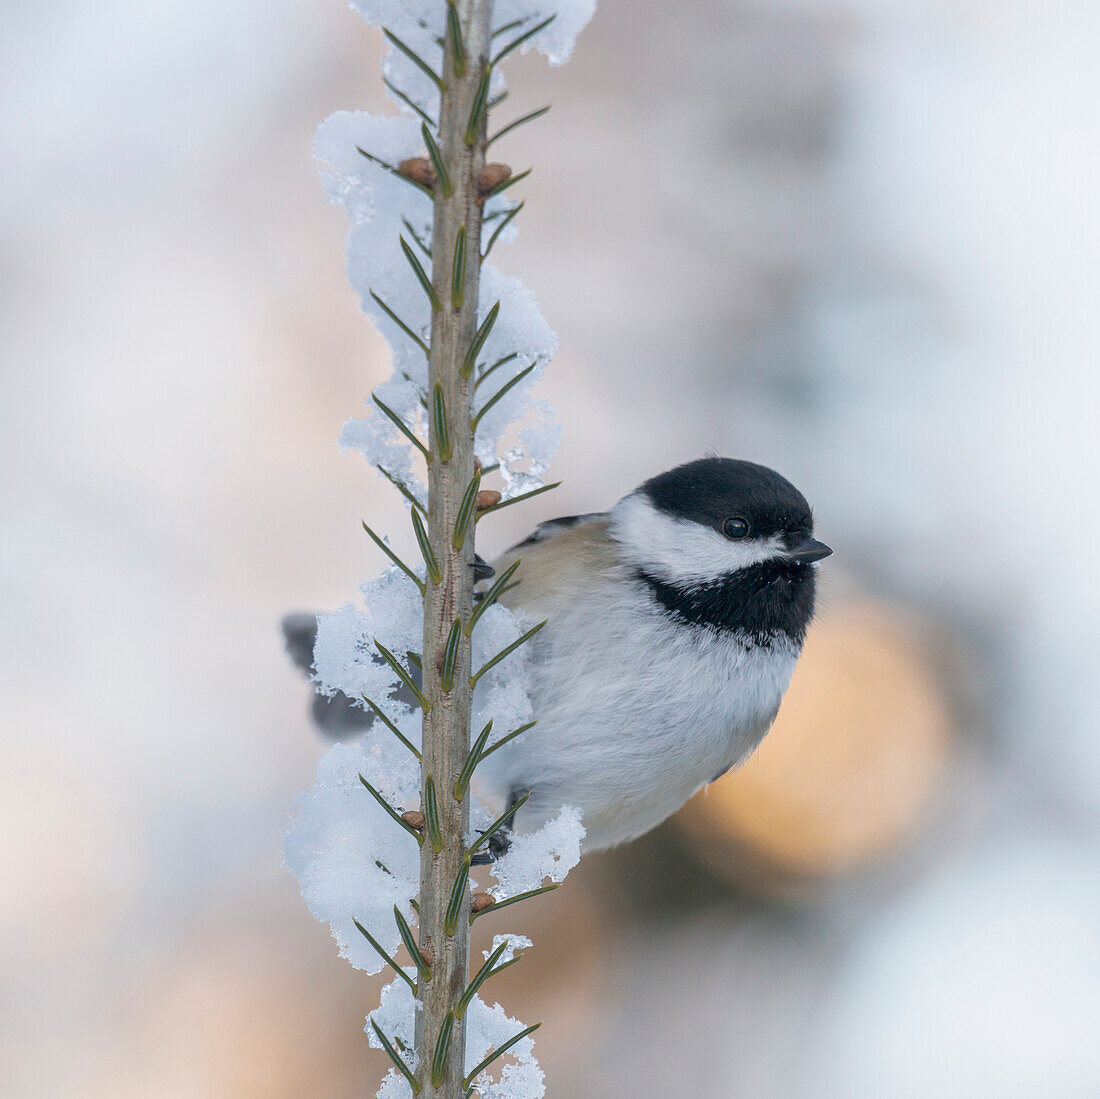 Chickadee sitting on a snow covered pine branch, Ontario, Canada